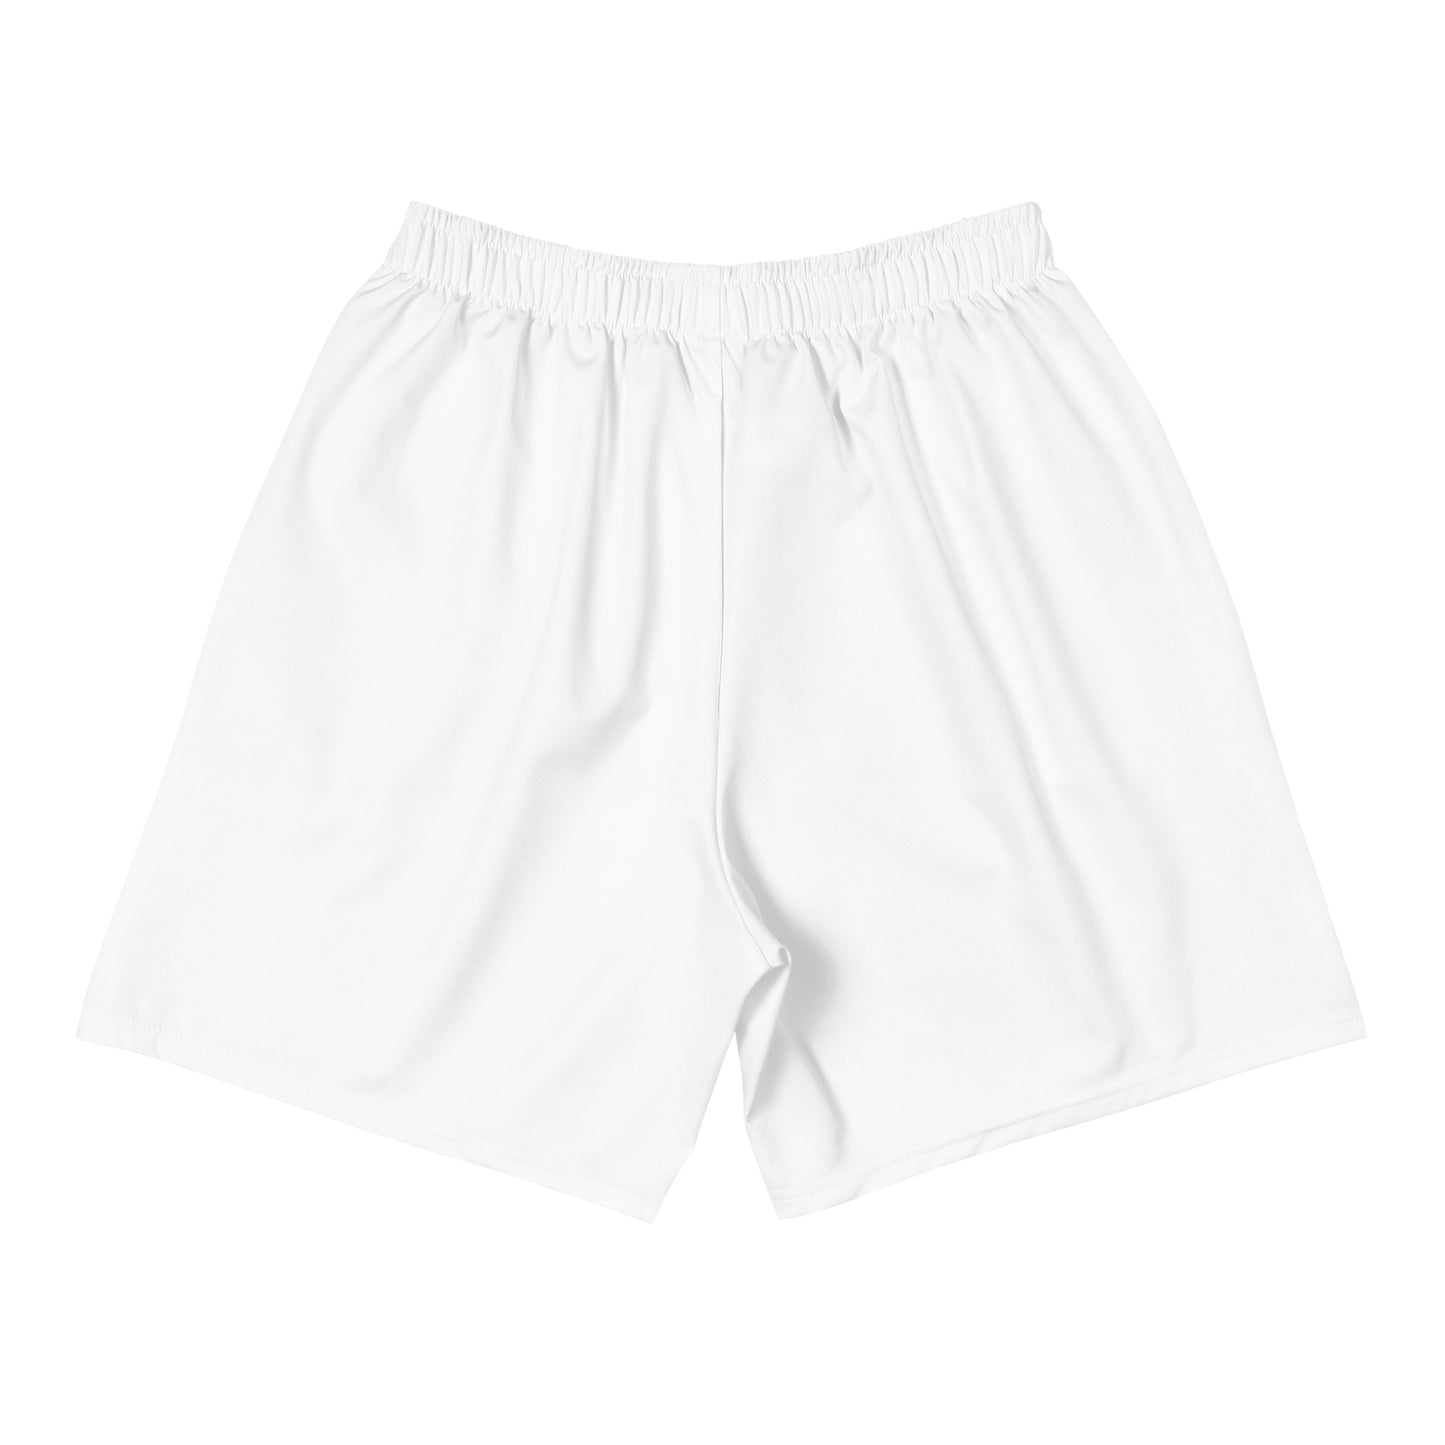 Wht/Dusty Rose Hip Suffer Athletic Shorts